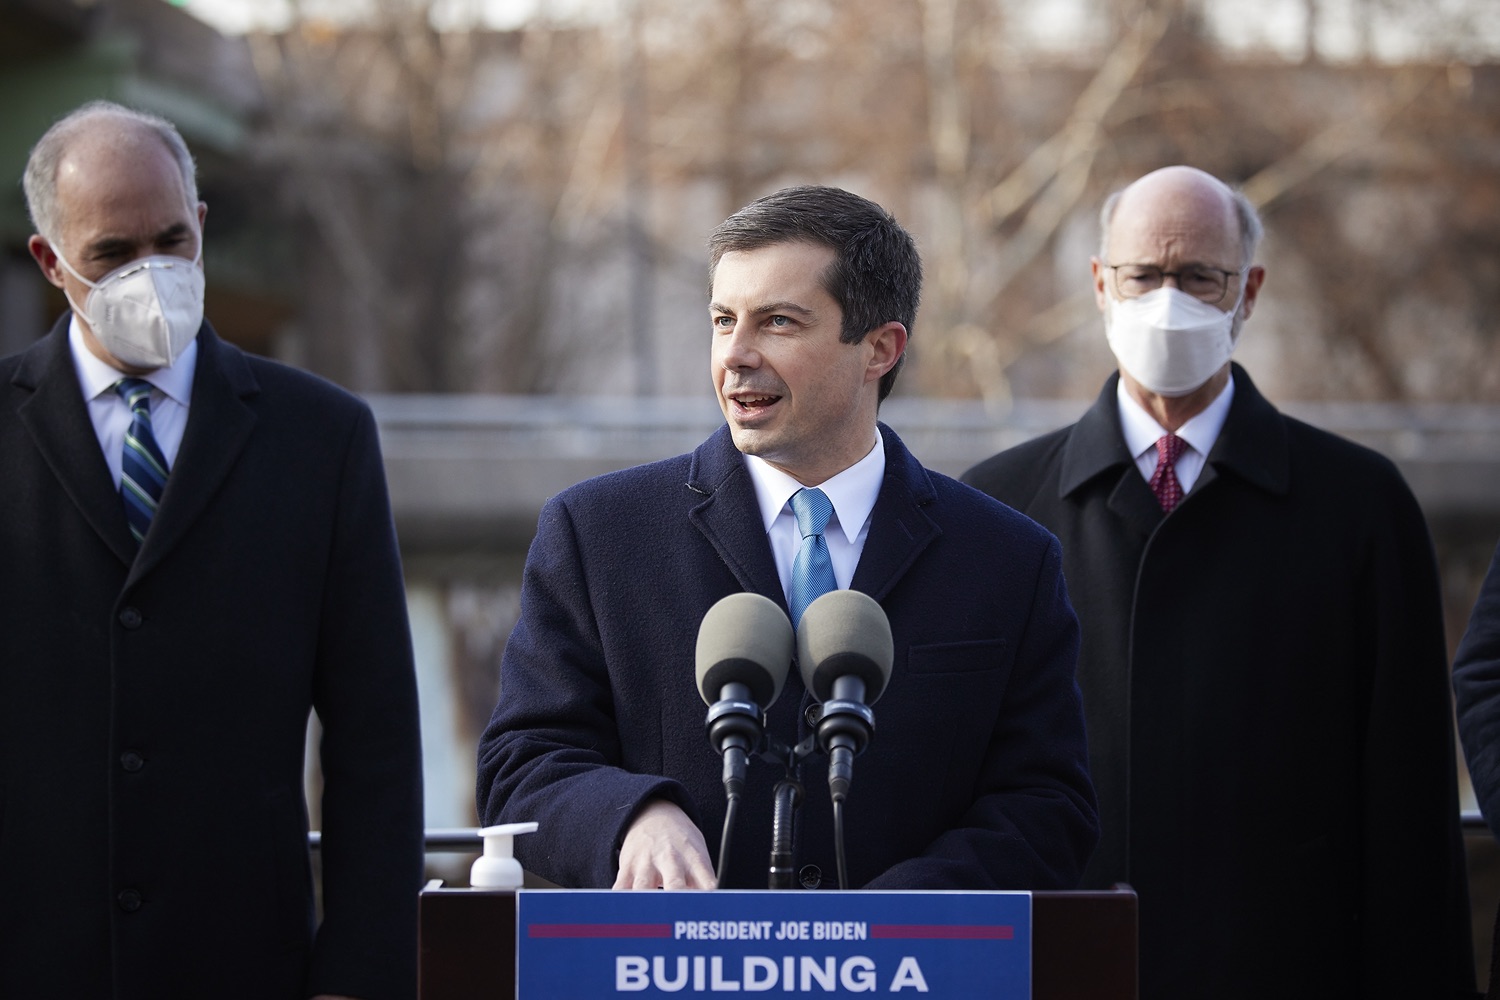 Pete Buttigieg, U.S. Secretary of Transportation speaks with the press.  Governor Tom Wolf stood alongside U.S. Transportation Secretary Pete Buttigieg to launch the largest bridge formula program in American history, made possible by the passage of the Bipartisan Infrastructure Law. Pennsylvania is set to receive $1.6 billion to fix more than 3,000 bridges across the commonwealth.  Philadelphia, PA  January 14, 2021<br><a href="https://filesource.amperwave.net/commonwealthofpa/photo/20426_gov_bridgeAnnoucement_dz_005_copy.jpg" target="_blank">⇣ Download Photo</a>